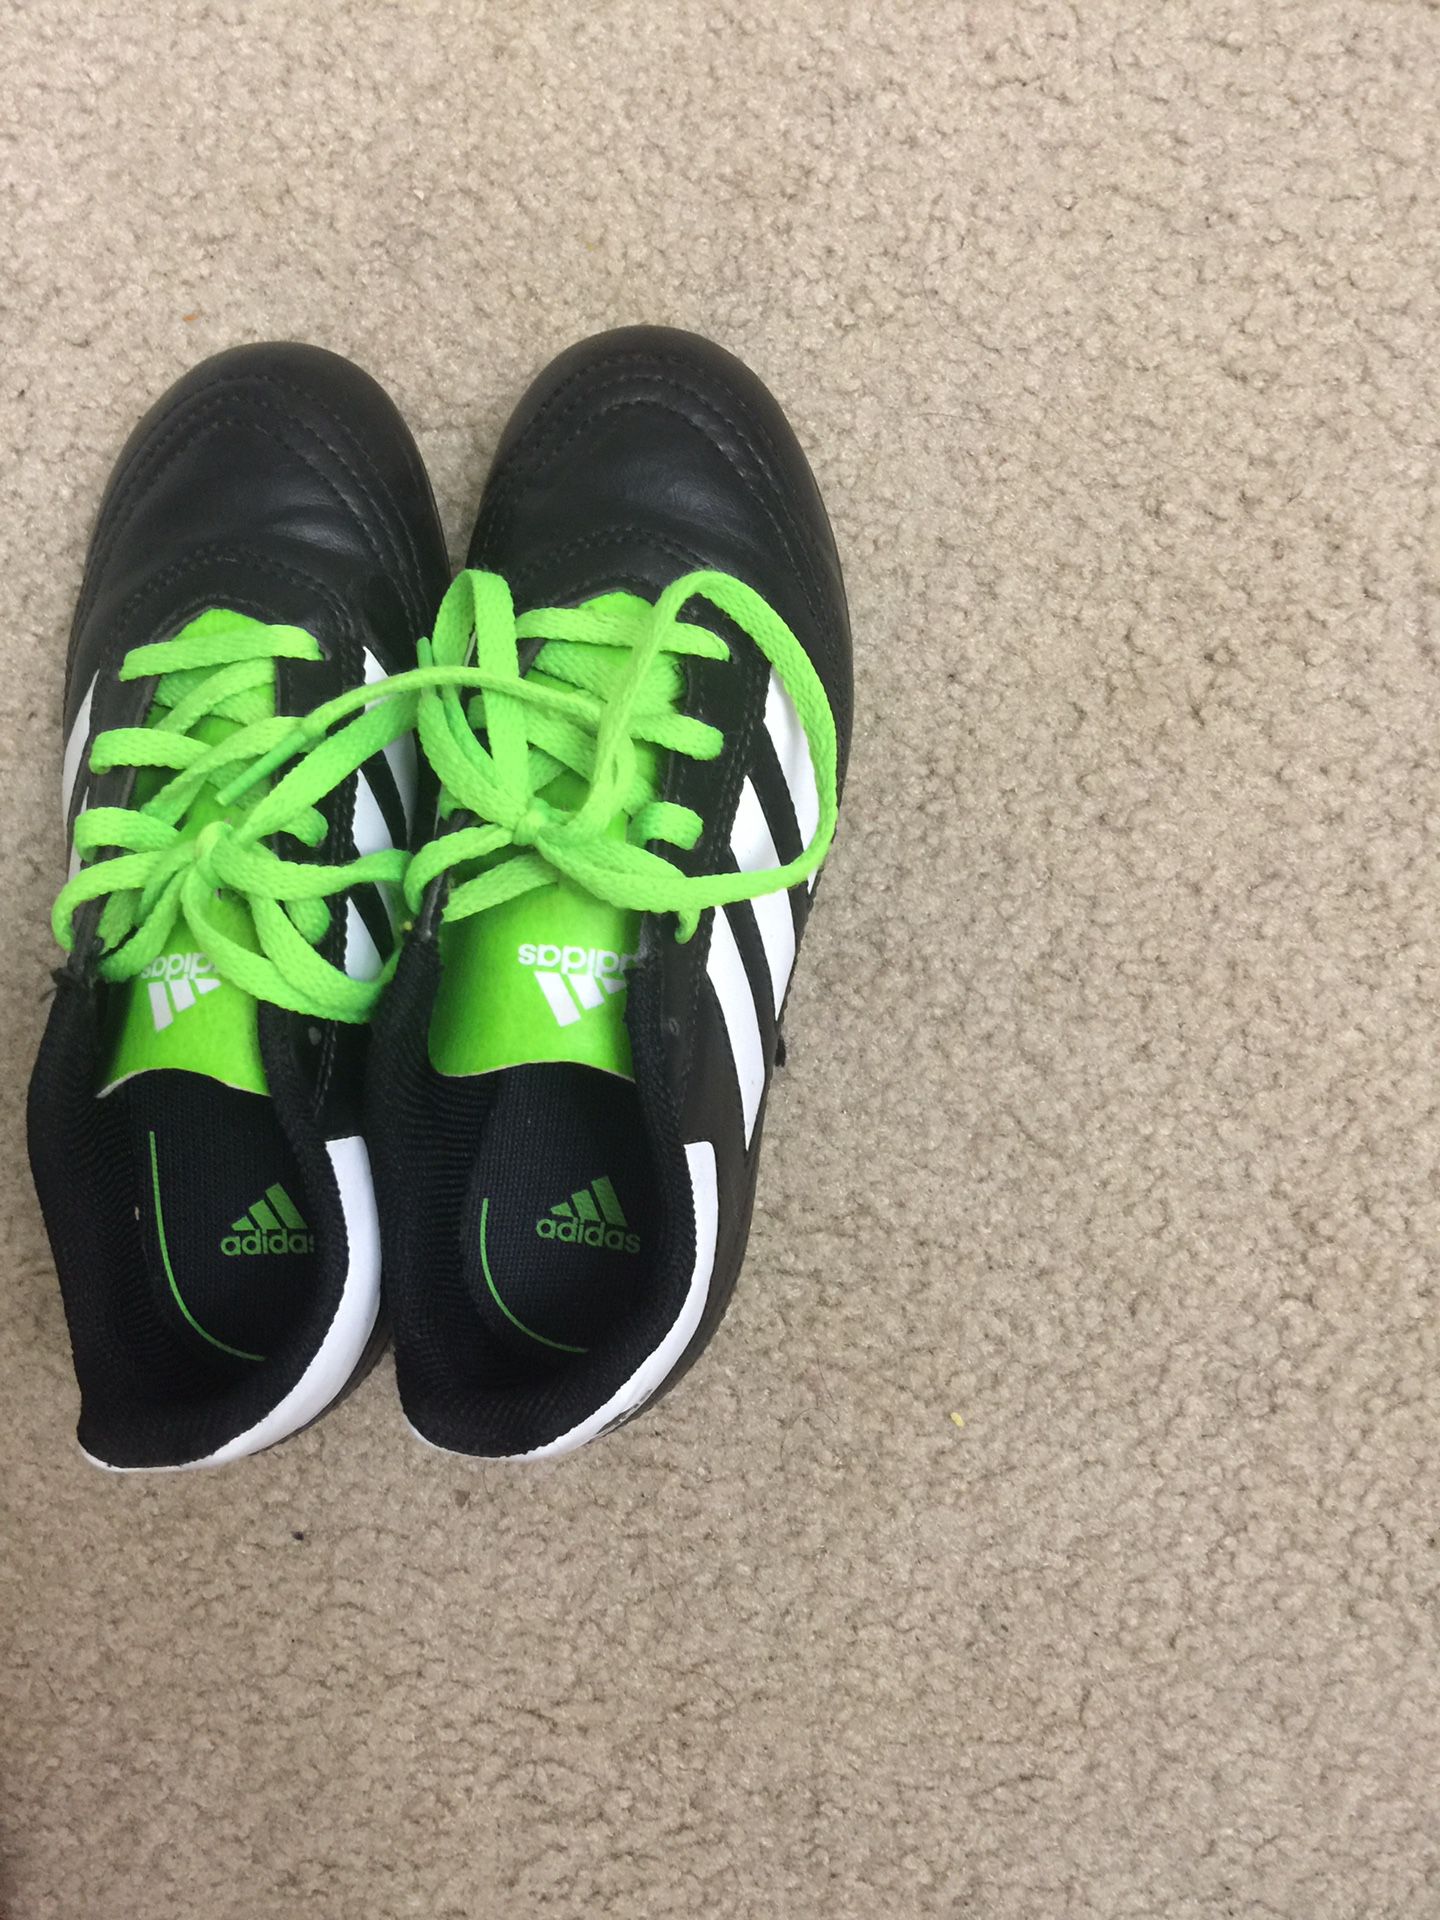 Adidas soccer cleats size 1